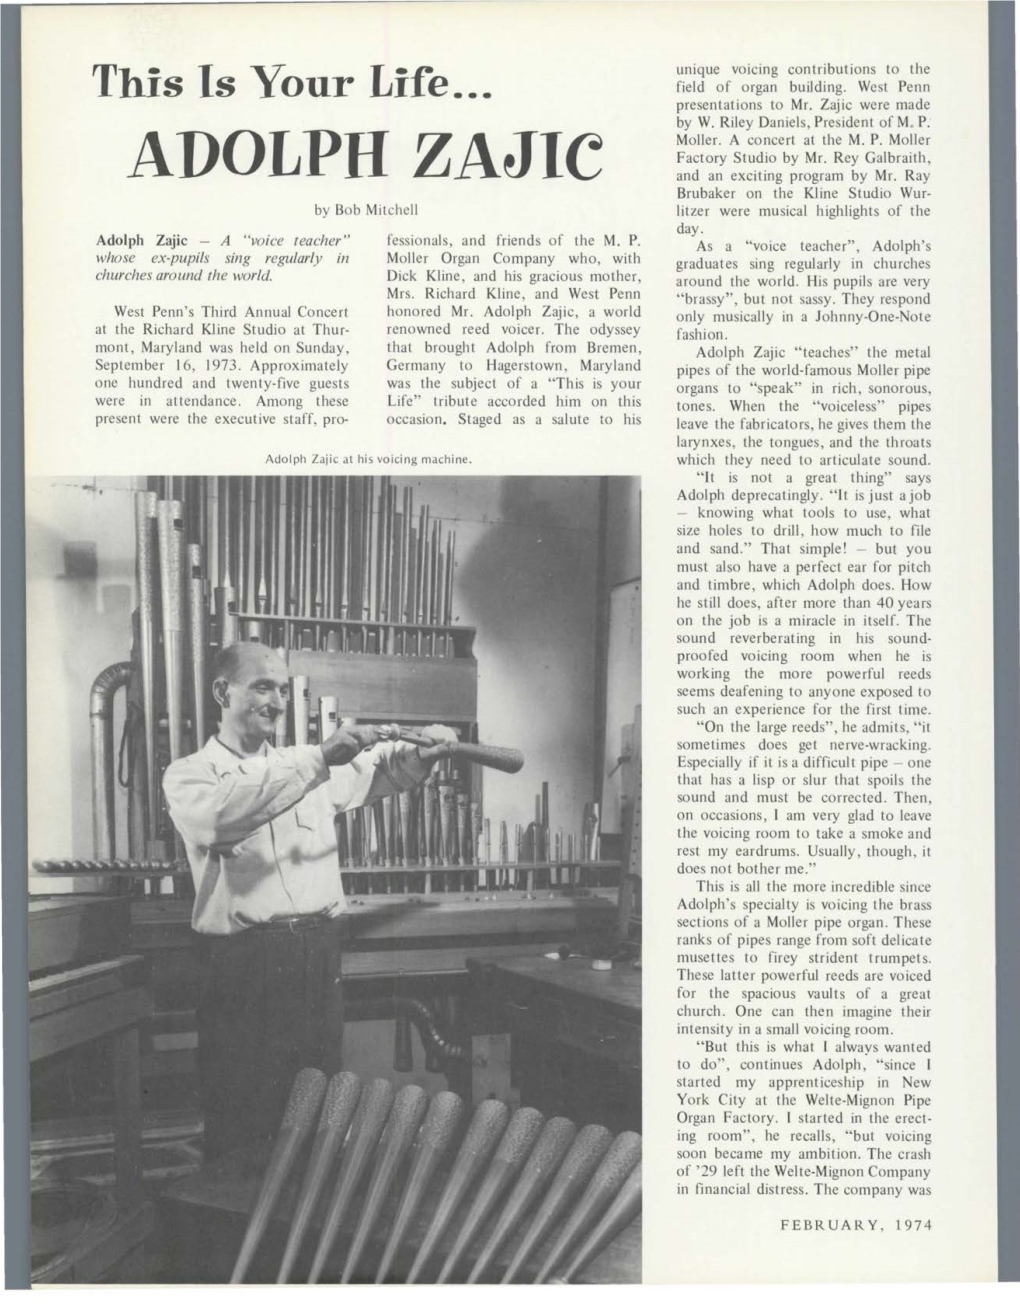 Adolph Zajic - a "Voice Teacher" Fessionals, and Friends of the M